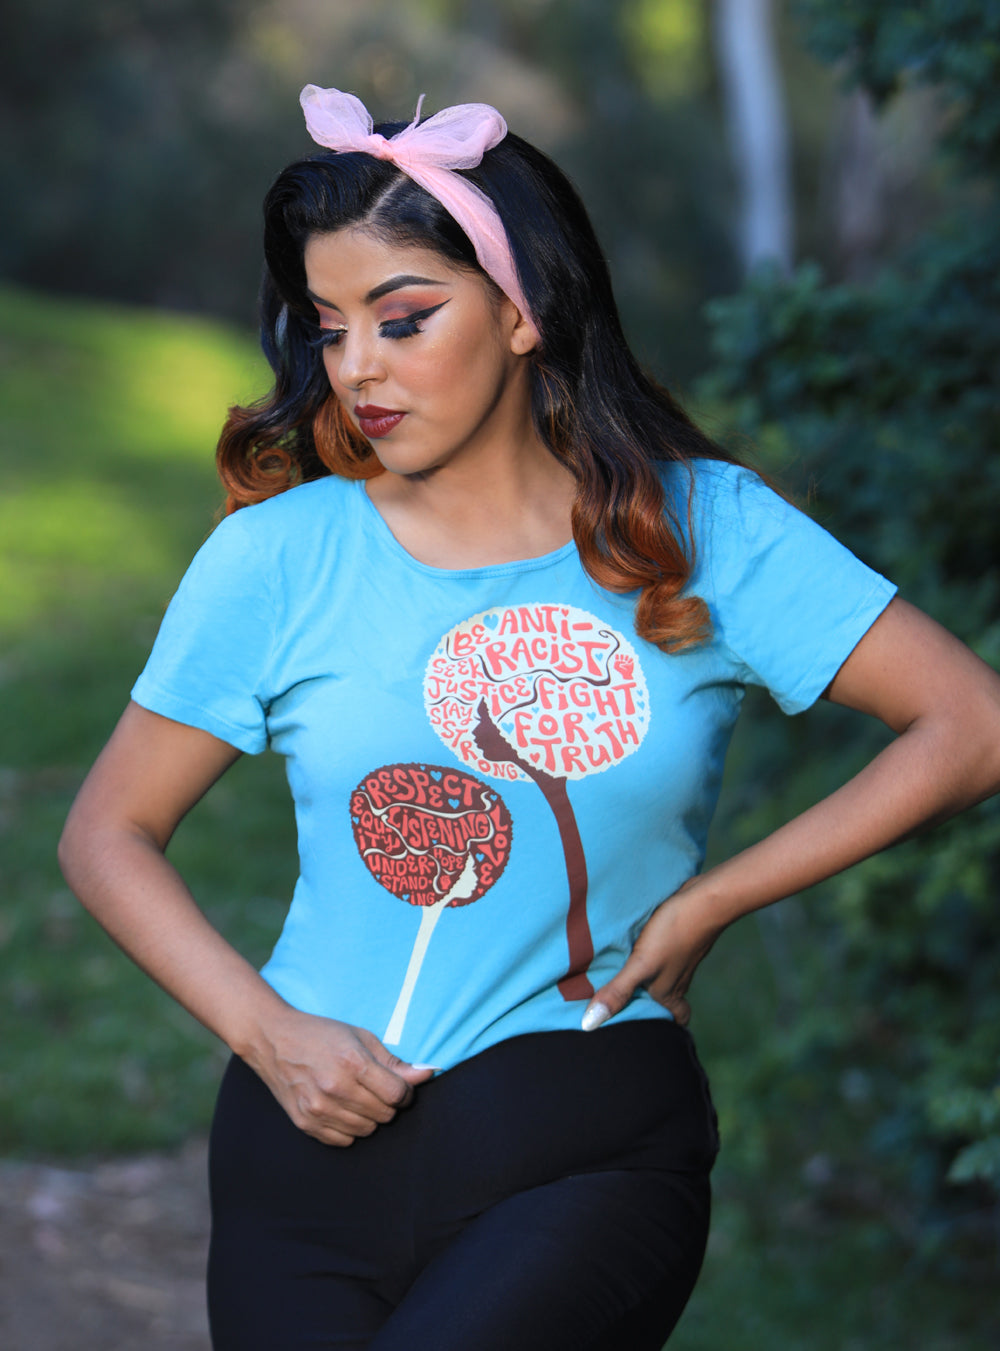 Light blue tee with design of afro girls or flowers with anti racist messages